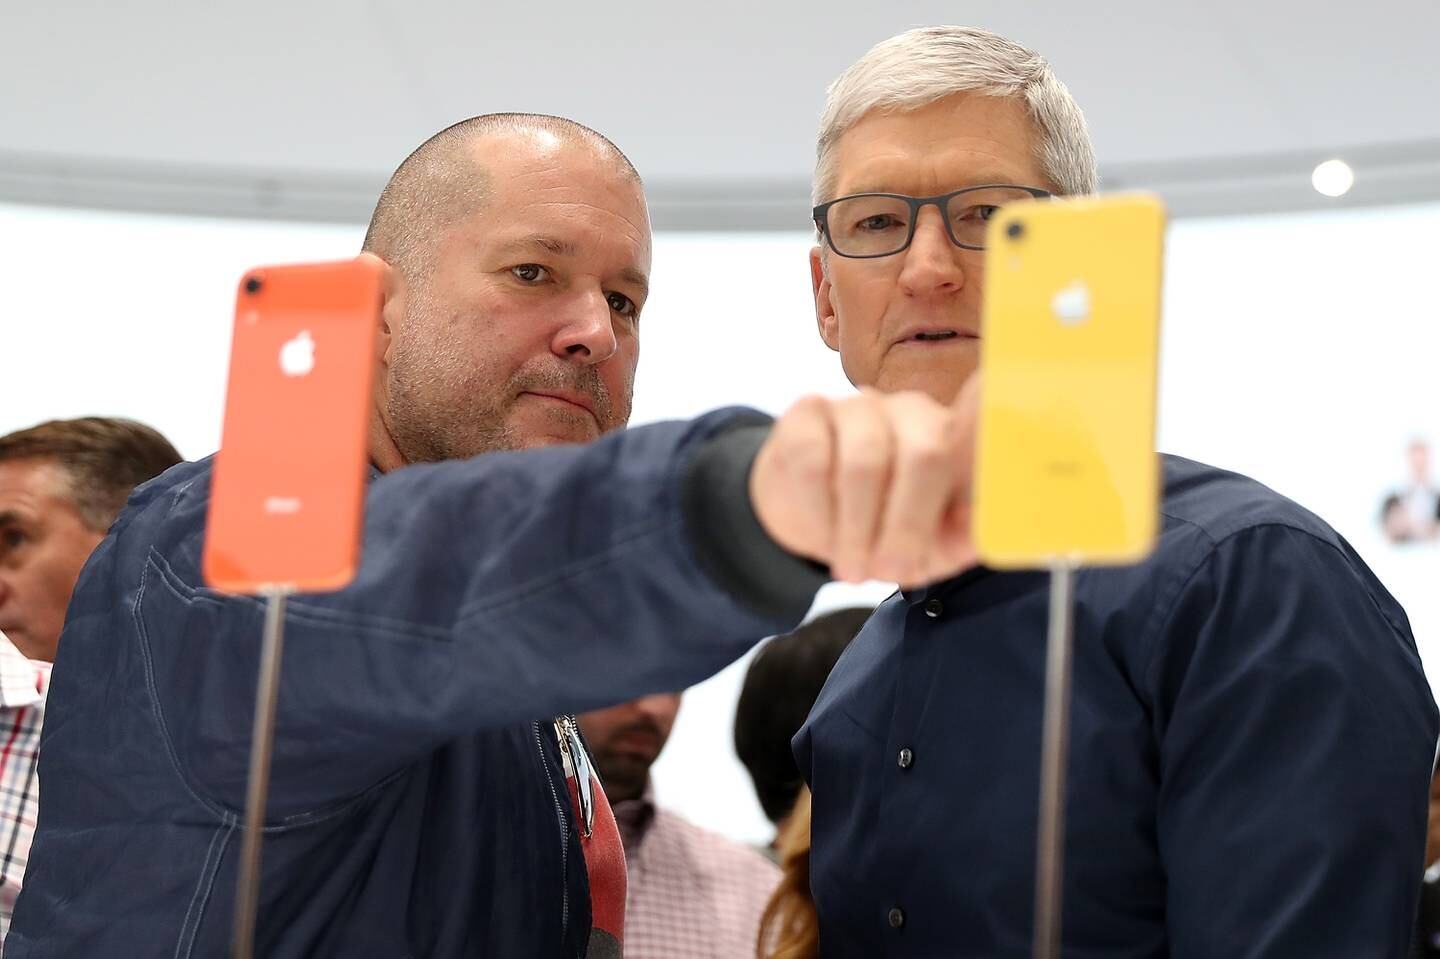 Sir Jony Ive with his former boss, Apple CEO Tim Cook, in 2018 - one year before he left to form LoveFrom. Getty Images